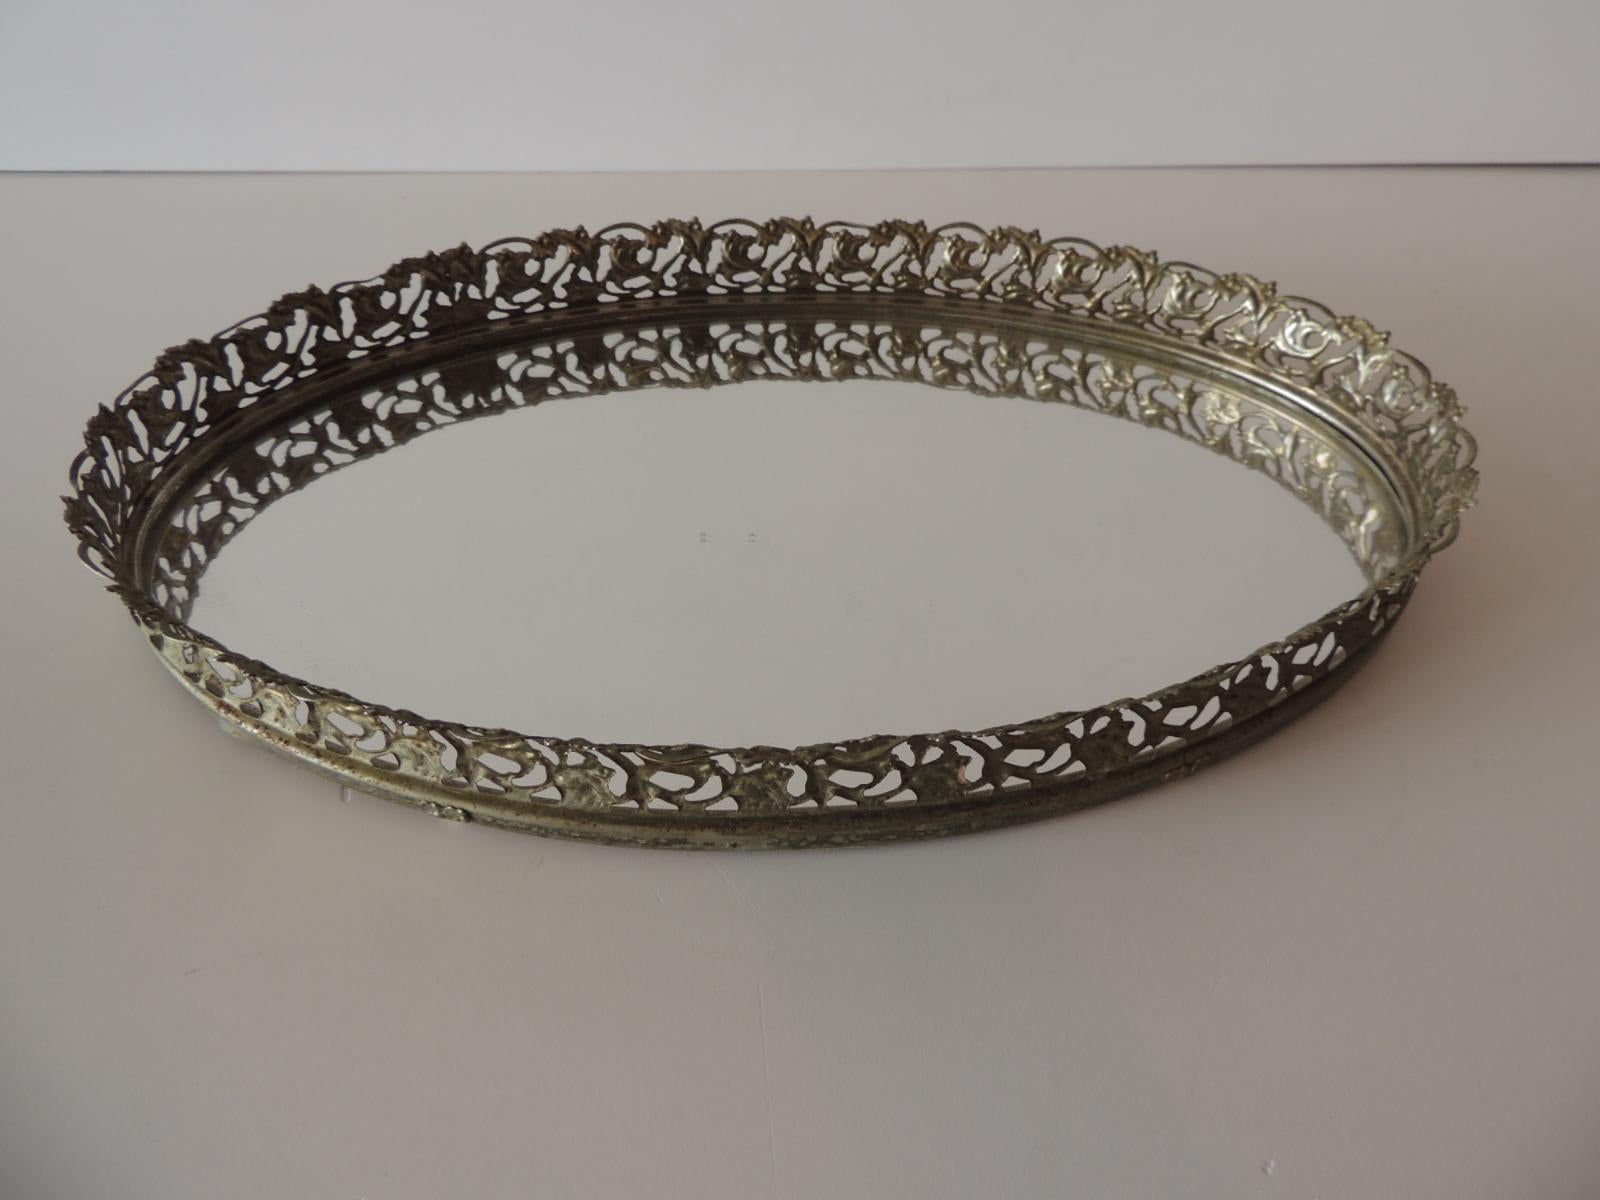 Vintage French filigree oval brass vanity tray with mirror
floral pierced tray edge with oval mirror inset. Felt backing.
Size: 13.5